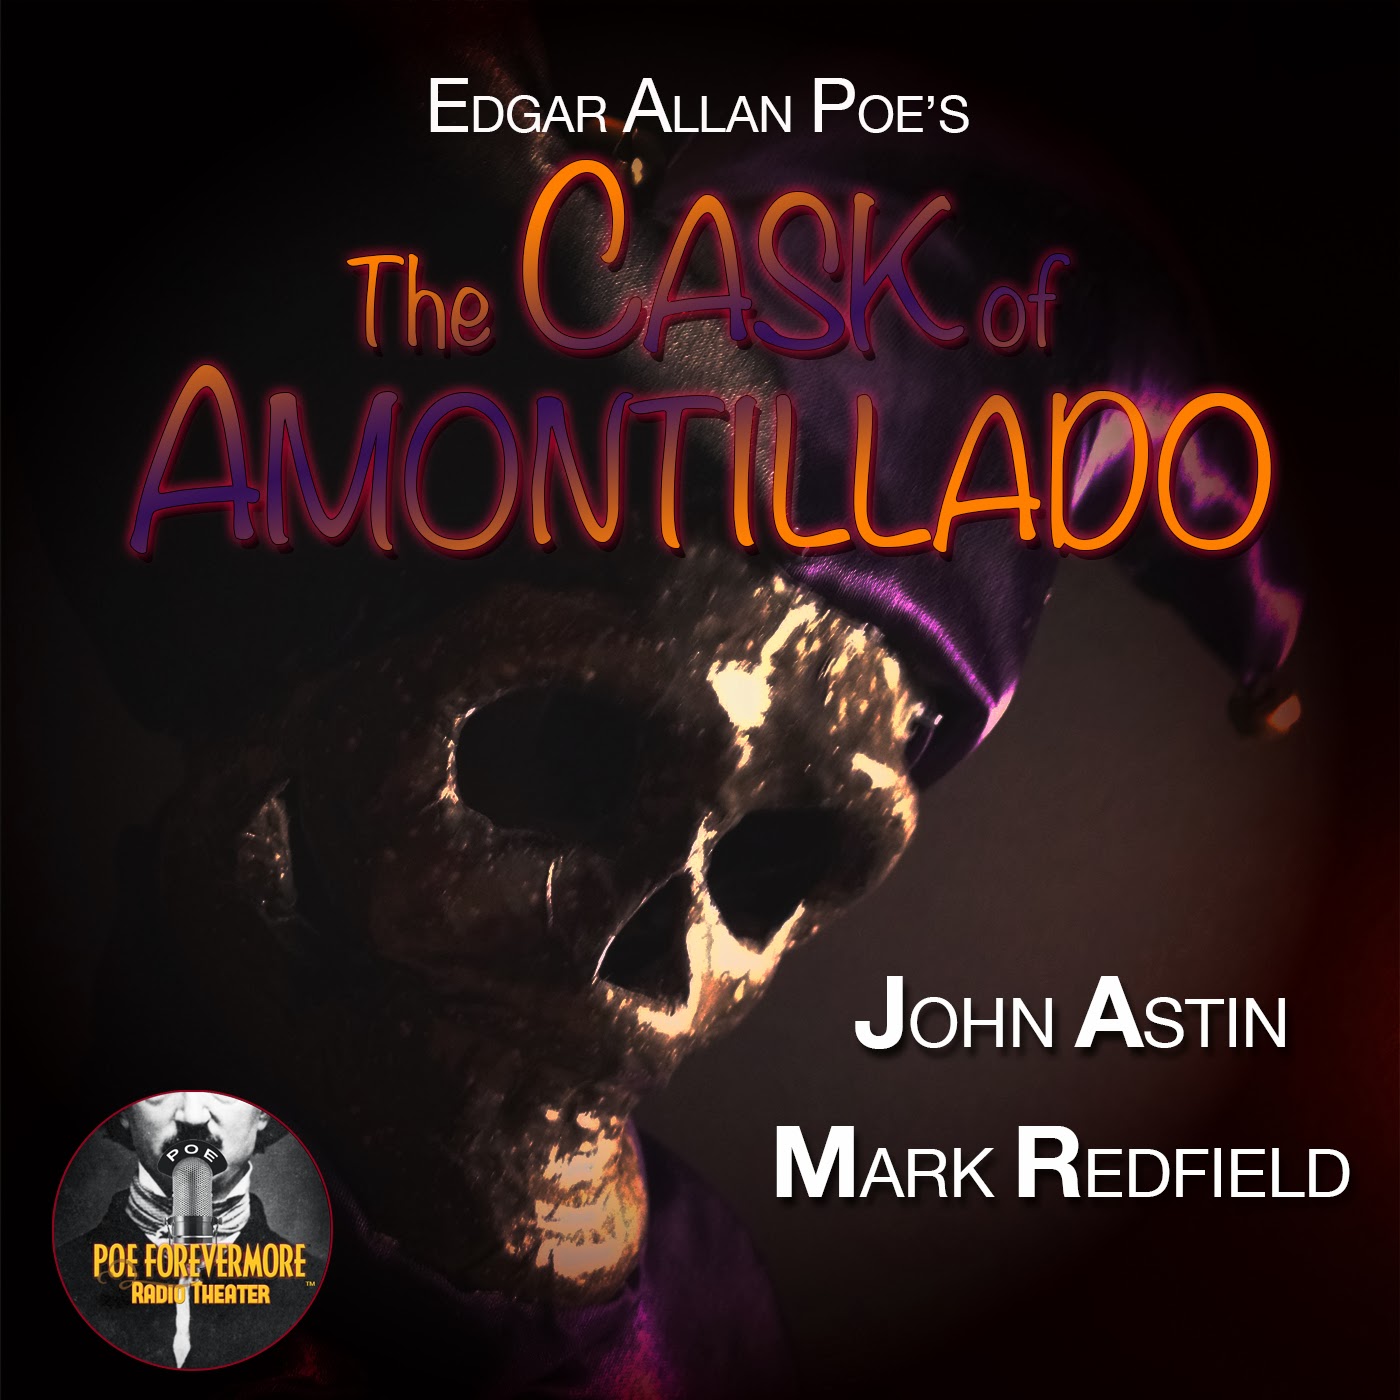 AUGUST'S AUDIO PLAY: THE CASK OF AMONTILLADO